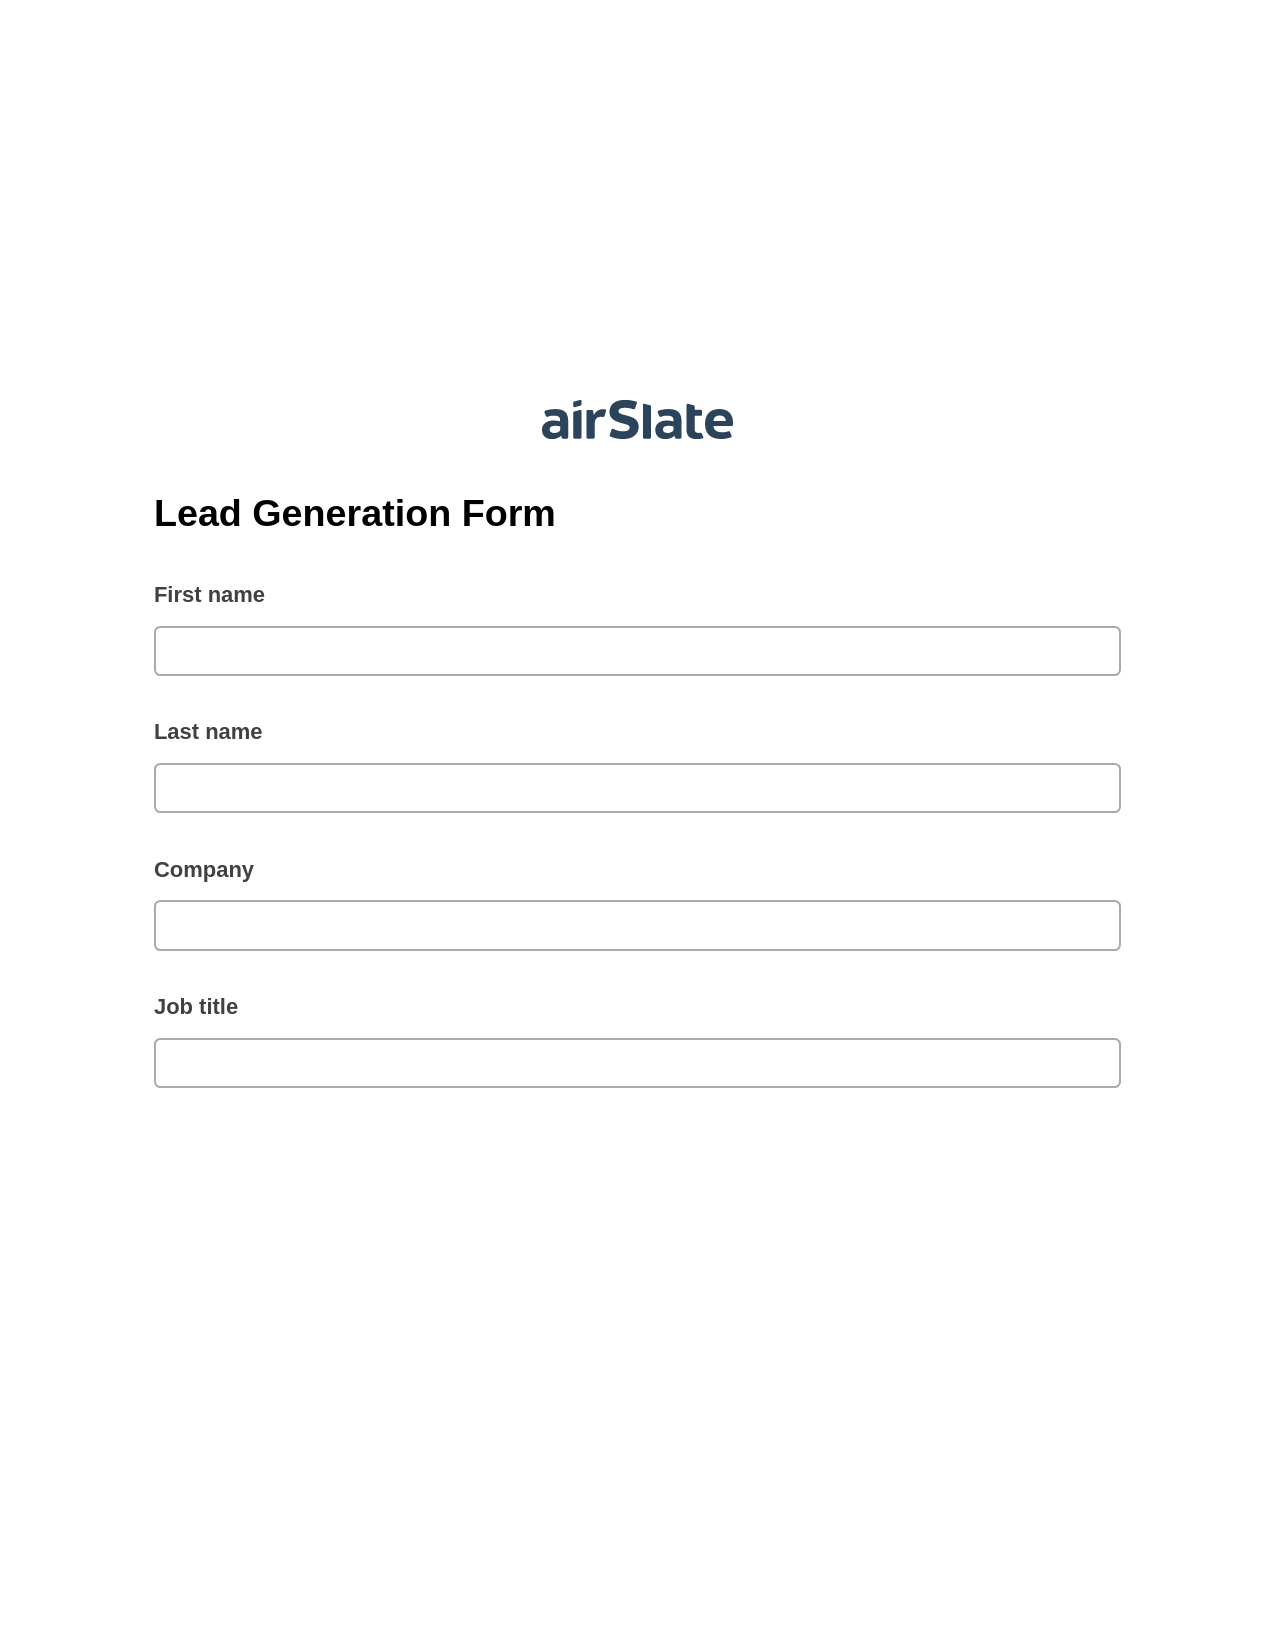 Lead Generation Form Pre-fill from another Slate Bot, Create Salesforce Records Bot, Export to WebMerge Bot